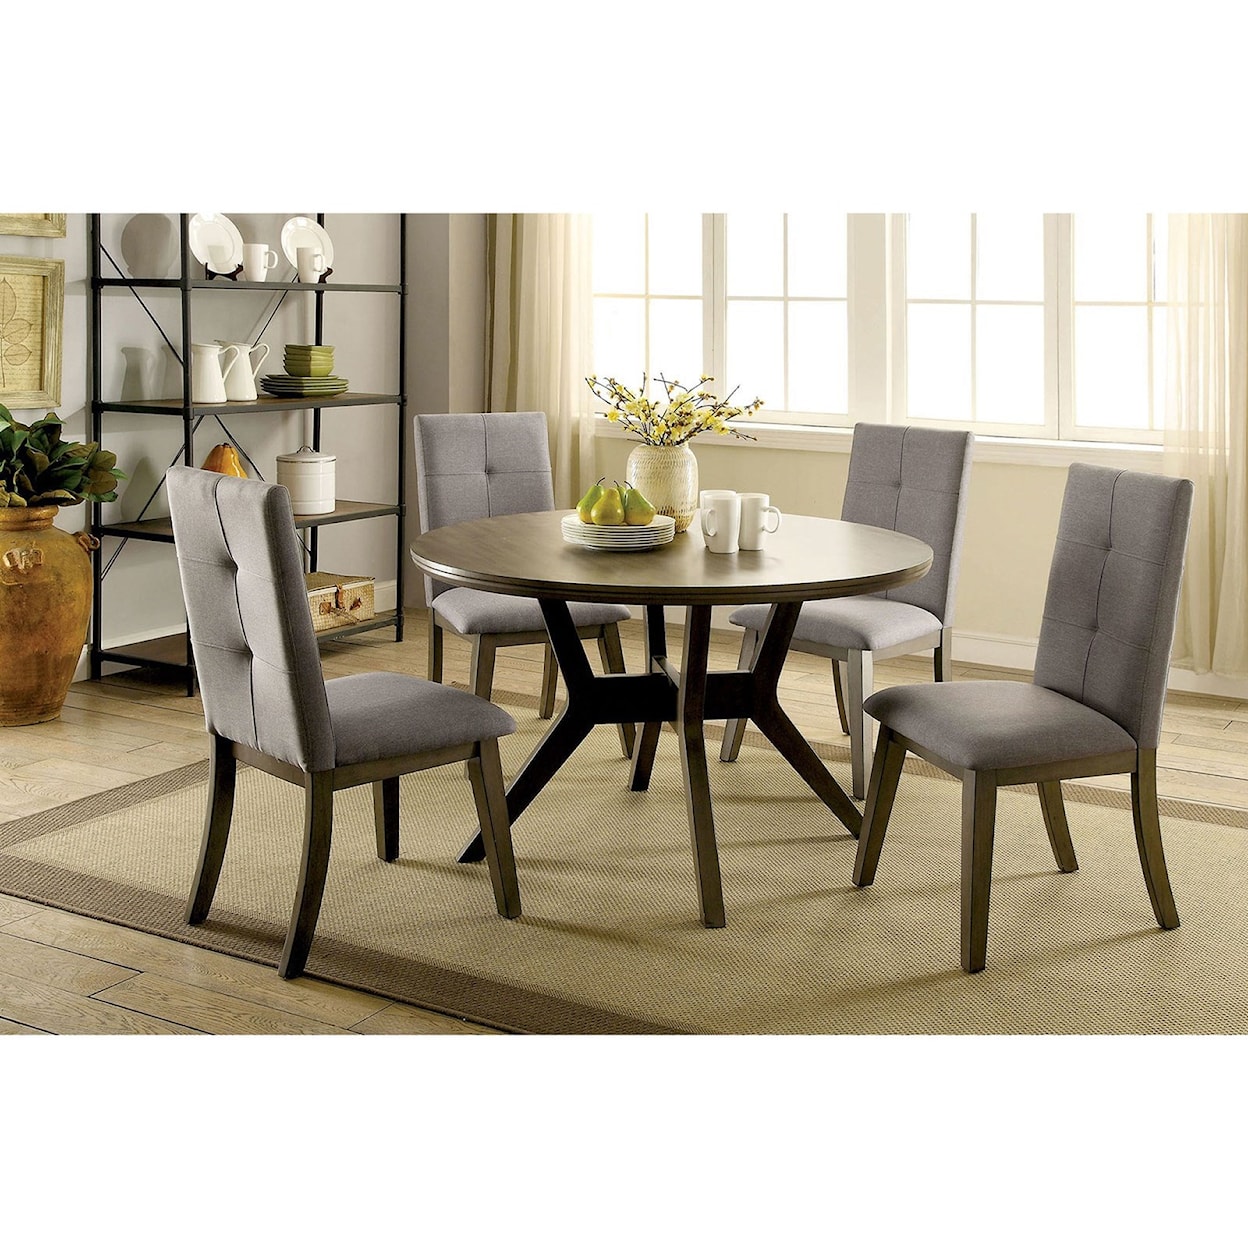 Furniture of America Abelone Table + 4 Chairs